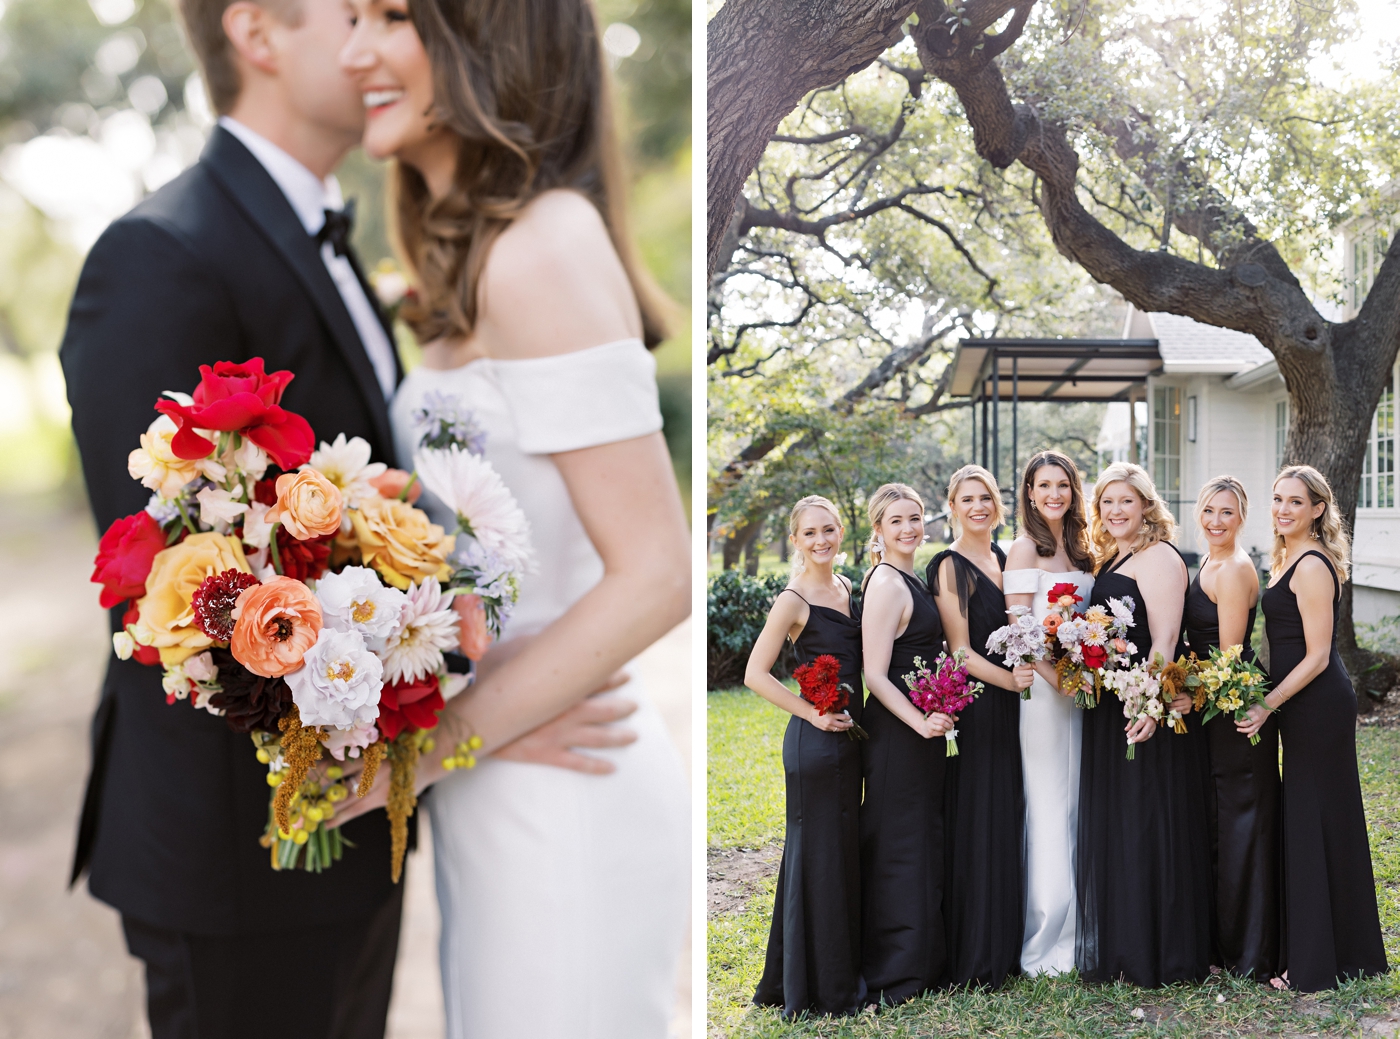 Colorful modern wedding in Austin with pops of black, mauve and red